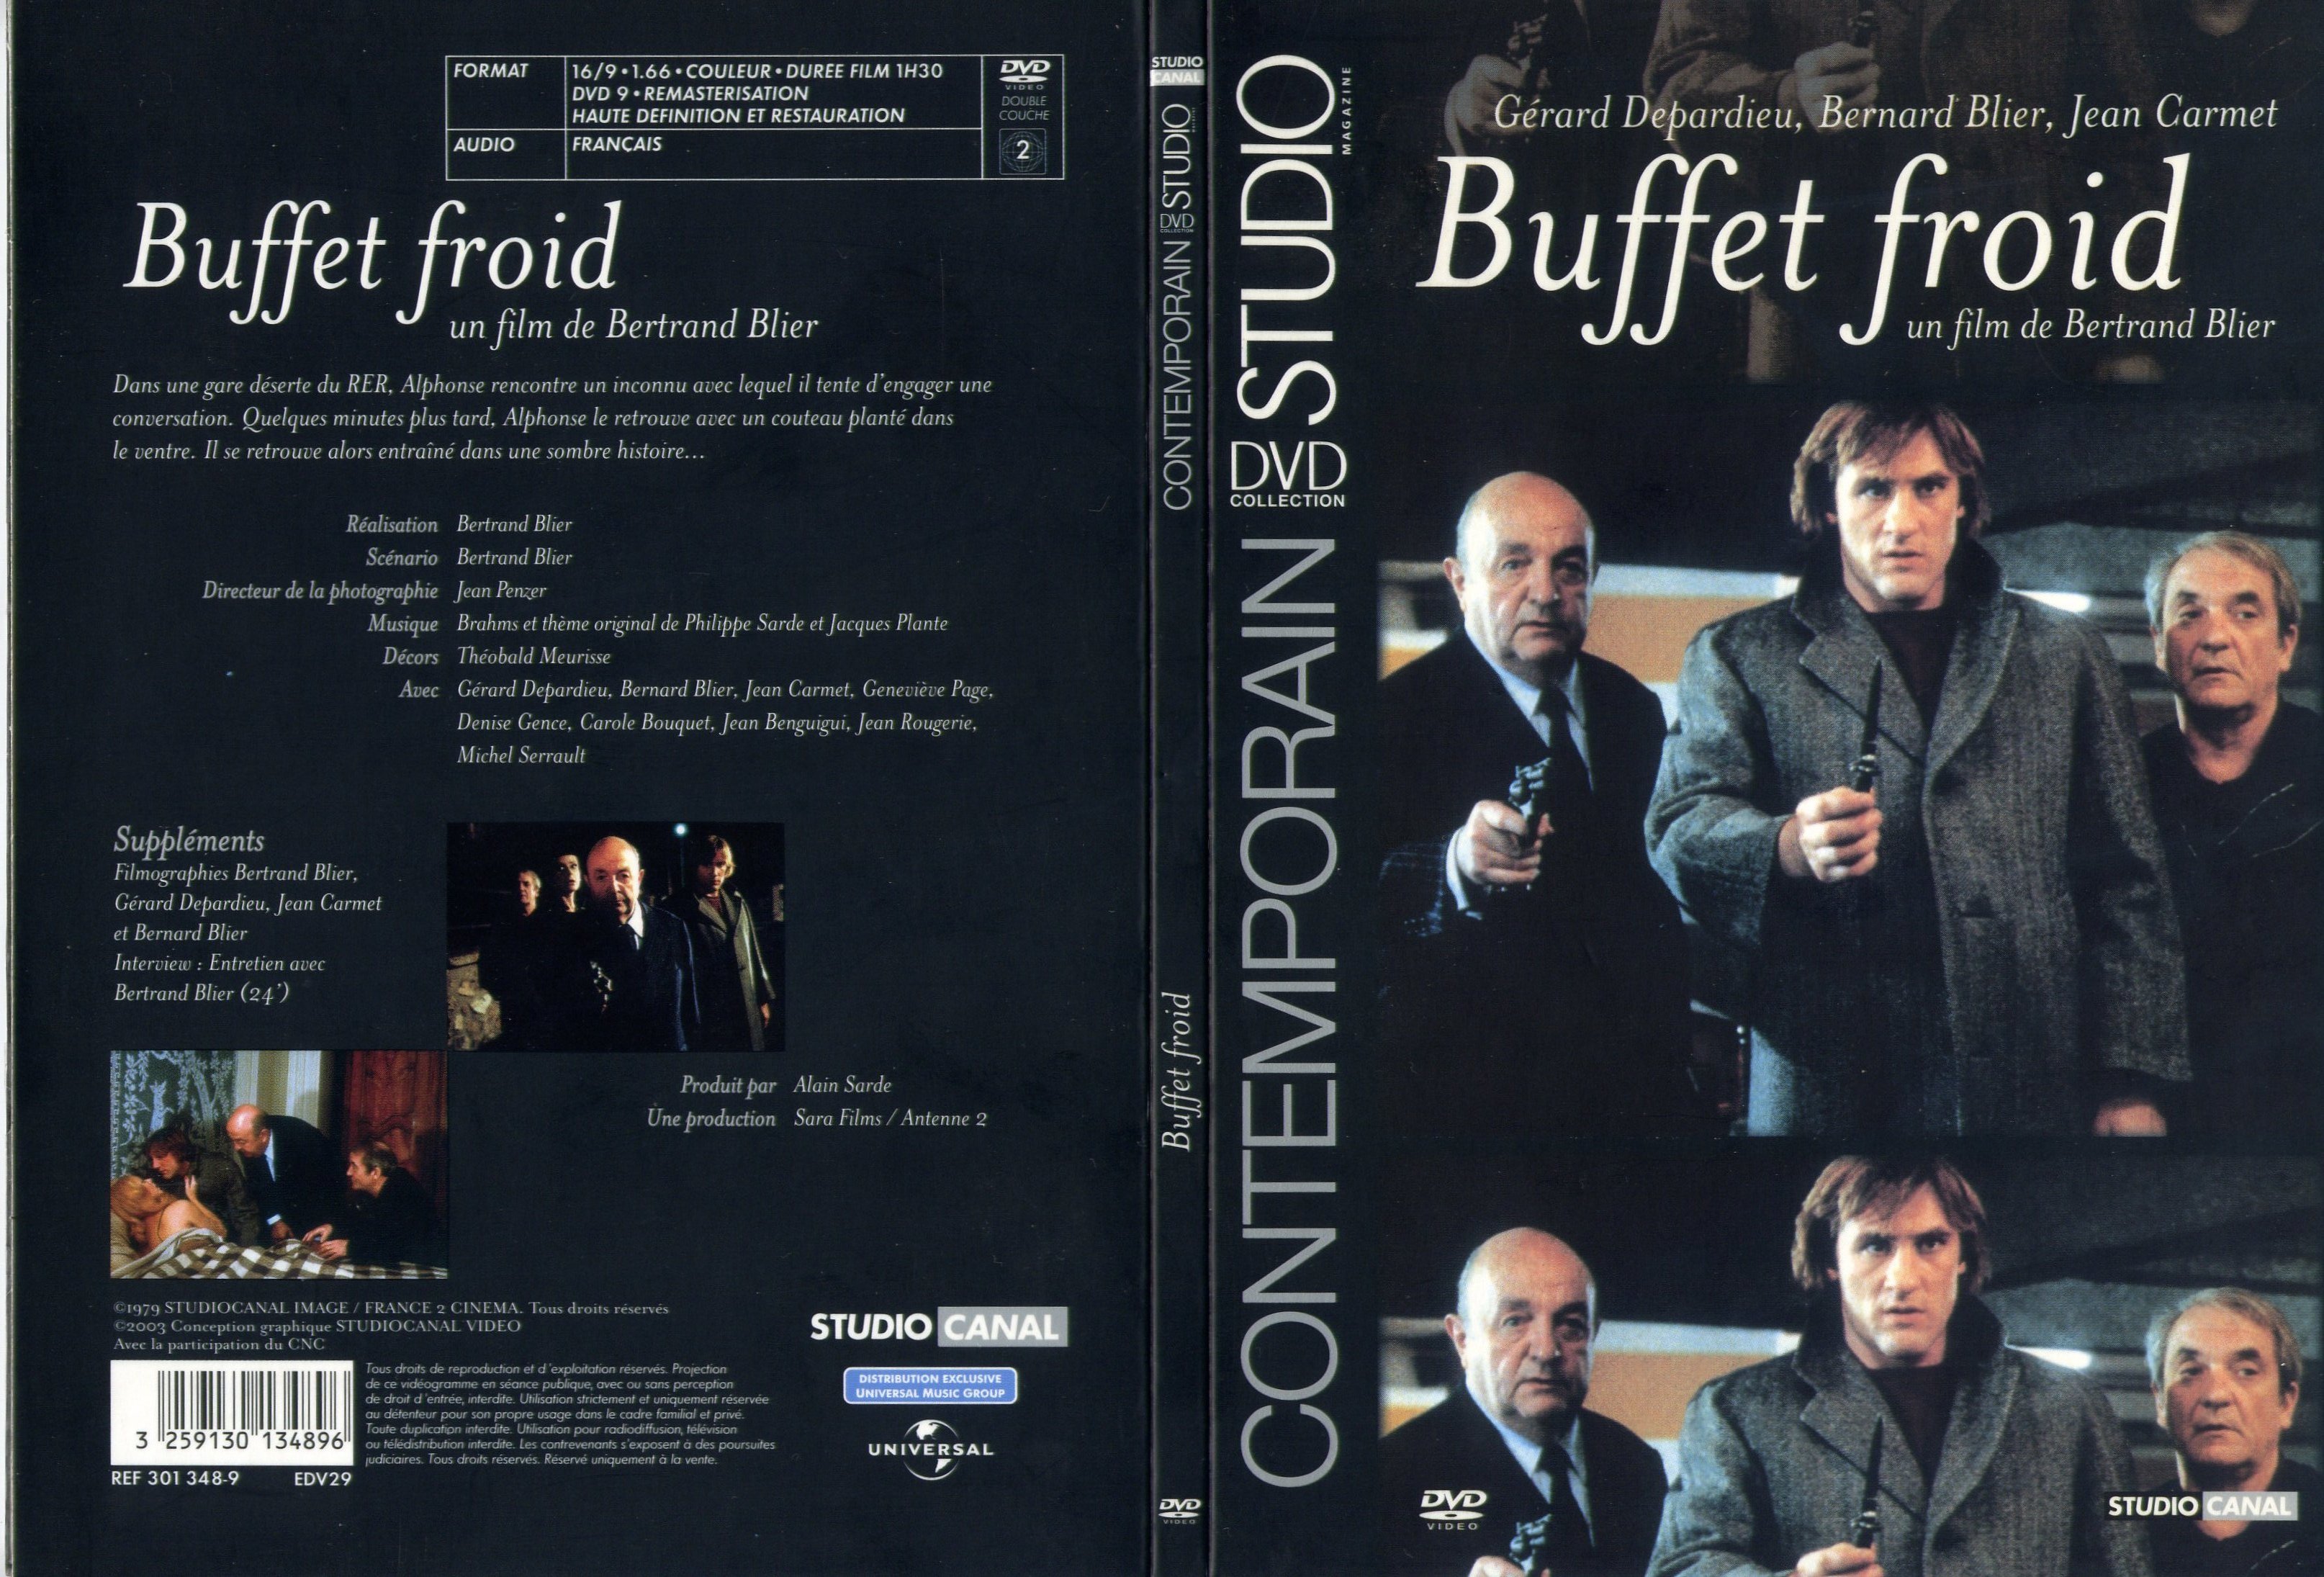 Jaquette DVD Buffet froid v2